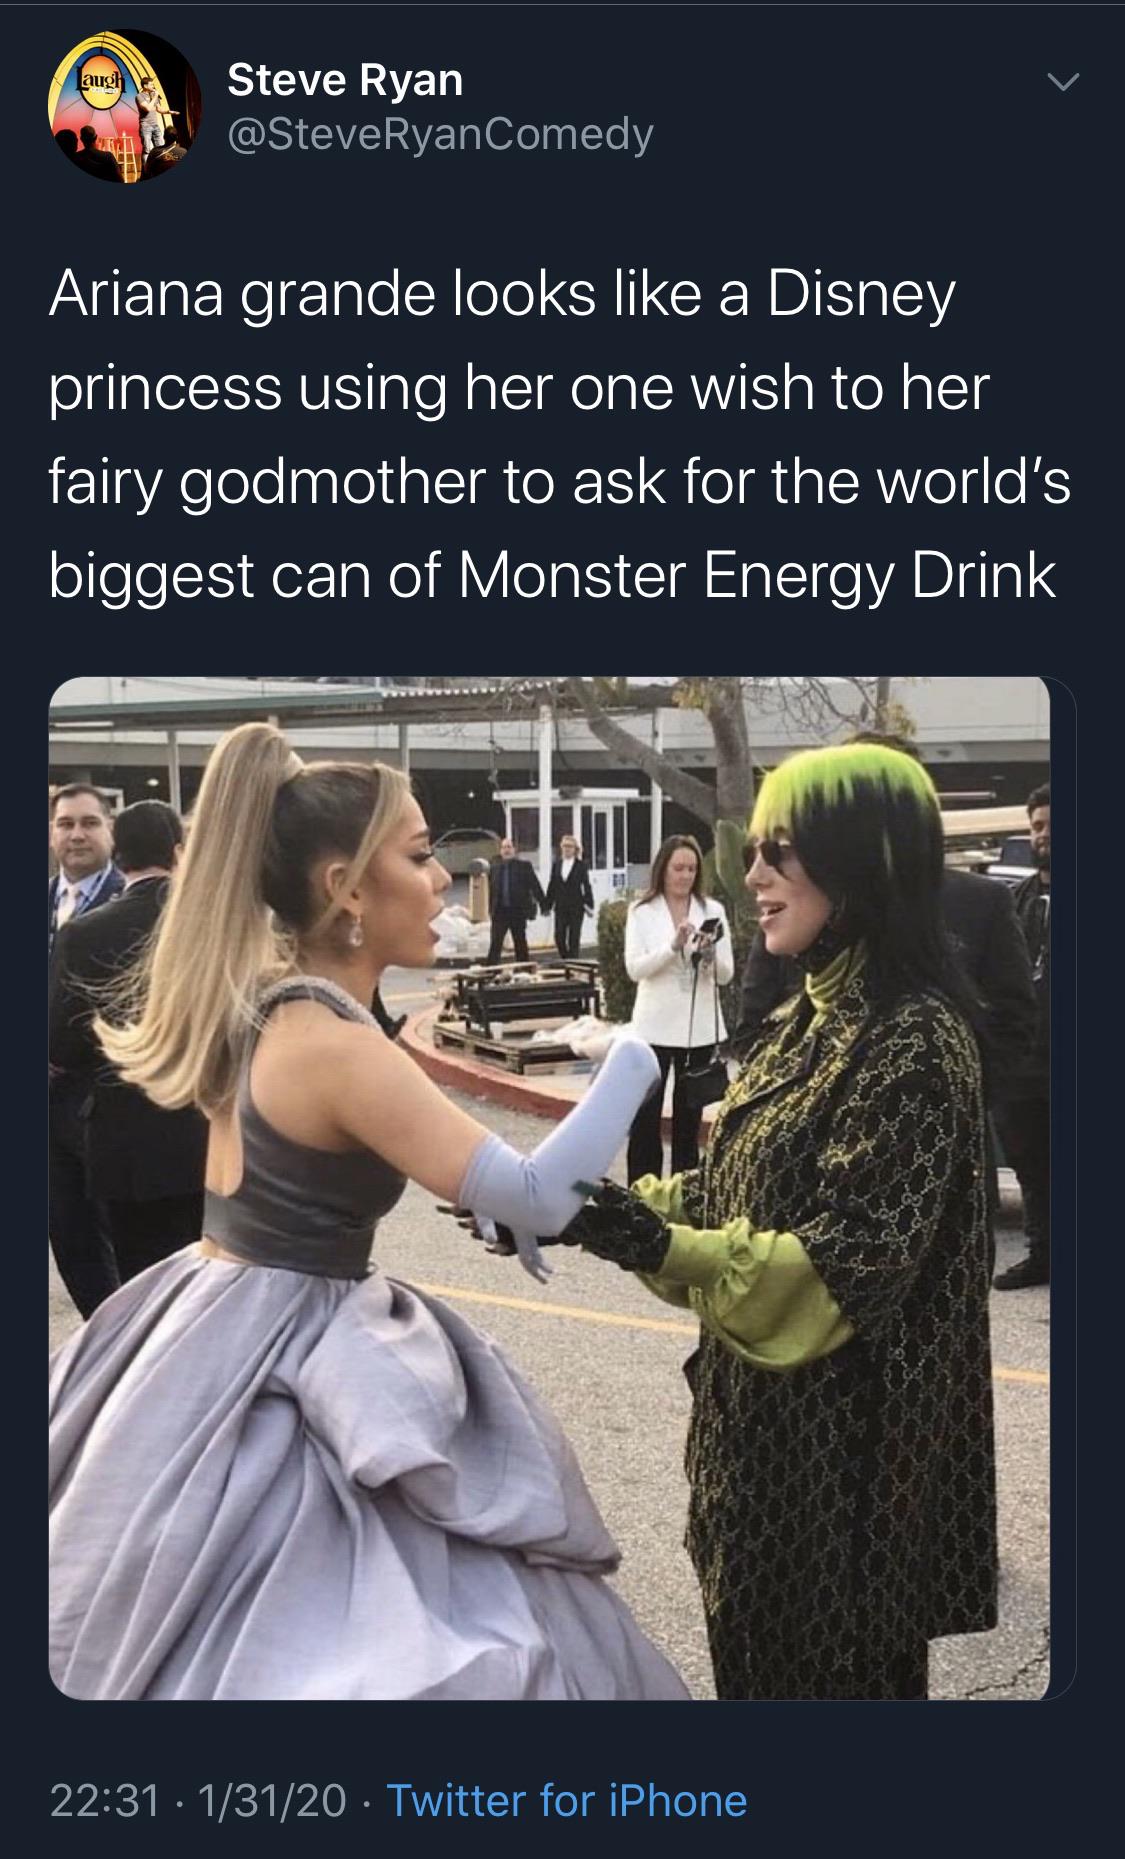 Billie Eilish - augh Steve Ryan Comedy Ariana grande looks a Disney princess using her one wish to her fairy godmother to ask for the world's biggest can of Monster Energy Drink 13120 Twitter for iPhone